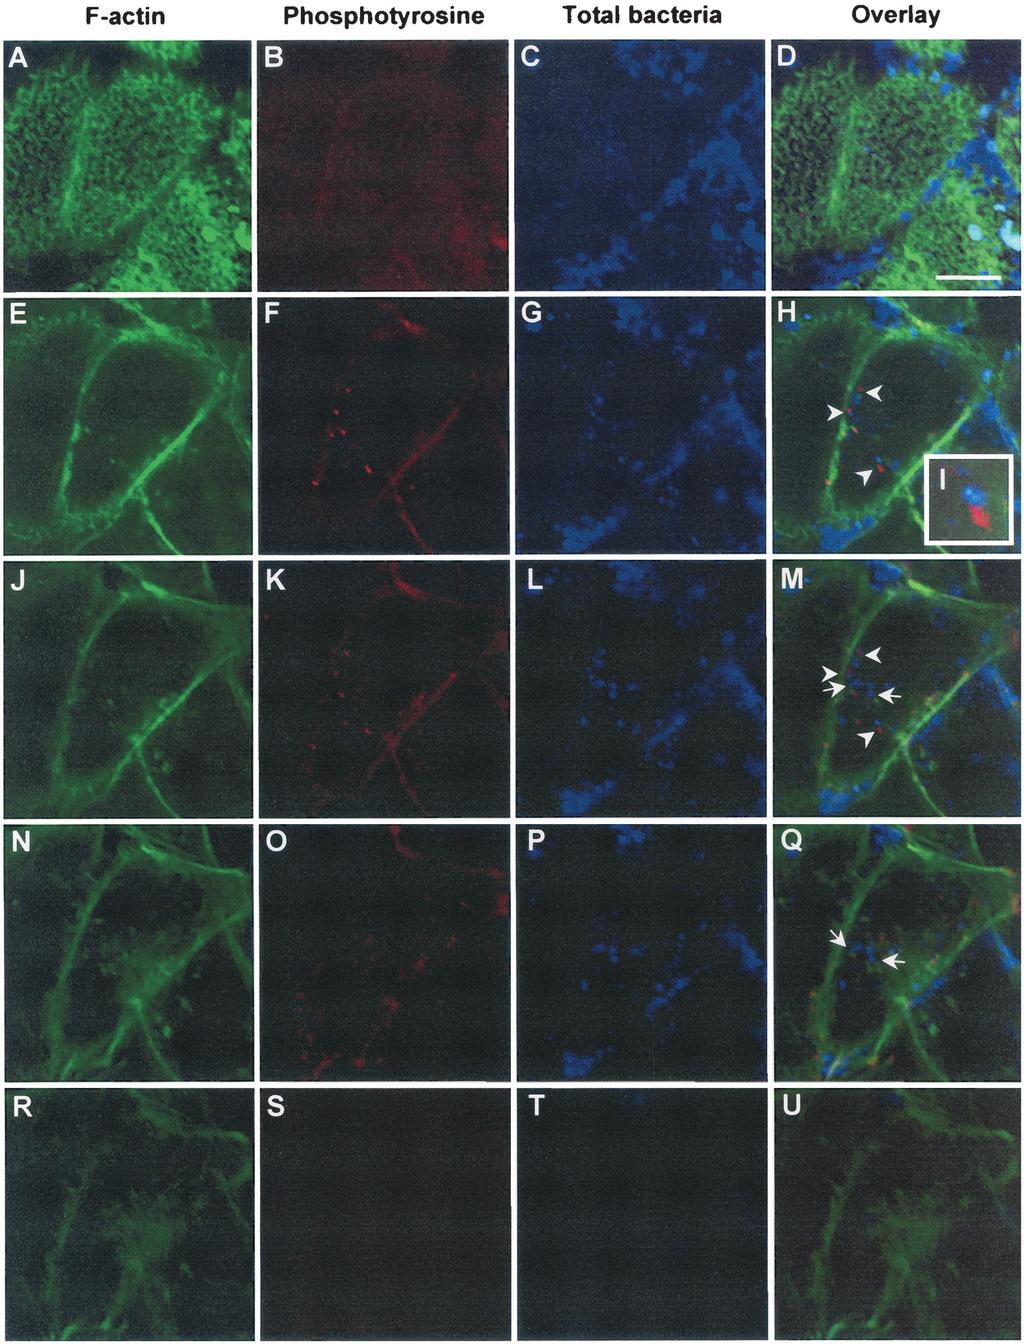 2114 KWOK ET AL. INFECT. IMMUN. FIG. 6. CLSM analysis of the spatial relationship among intracellular H. pylori, host actin cytoskeleton, and protein phosphotyrosine signals.